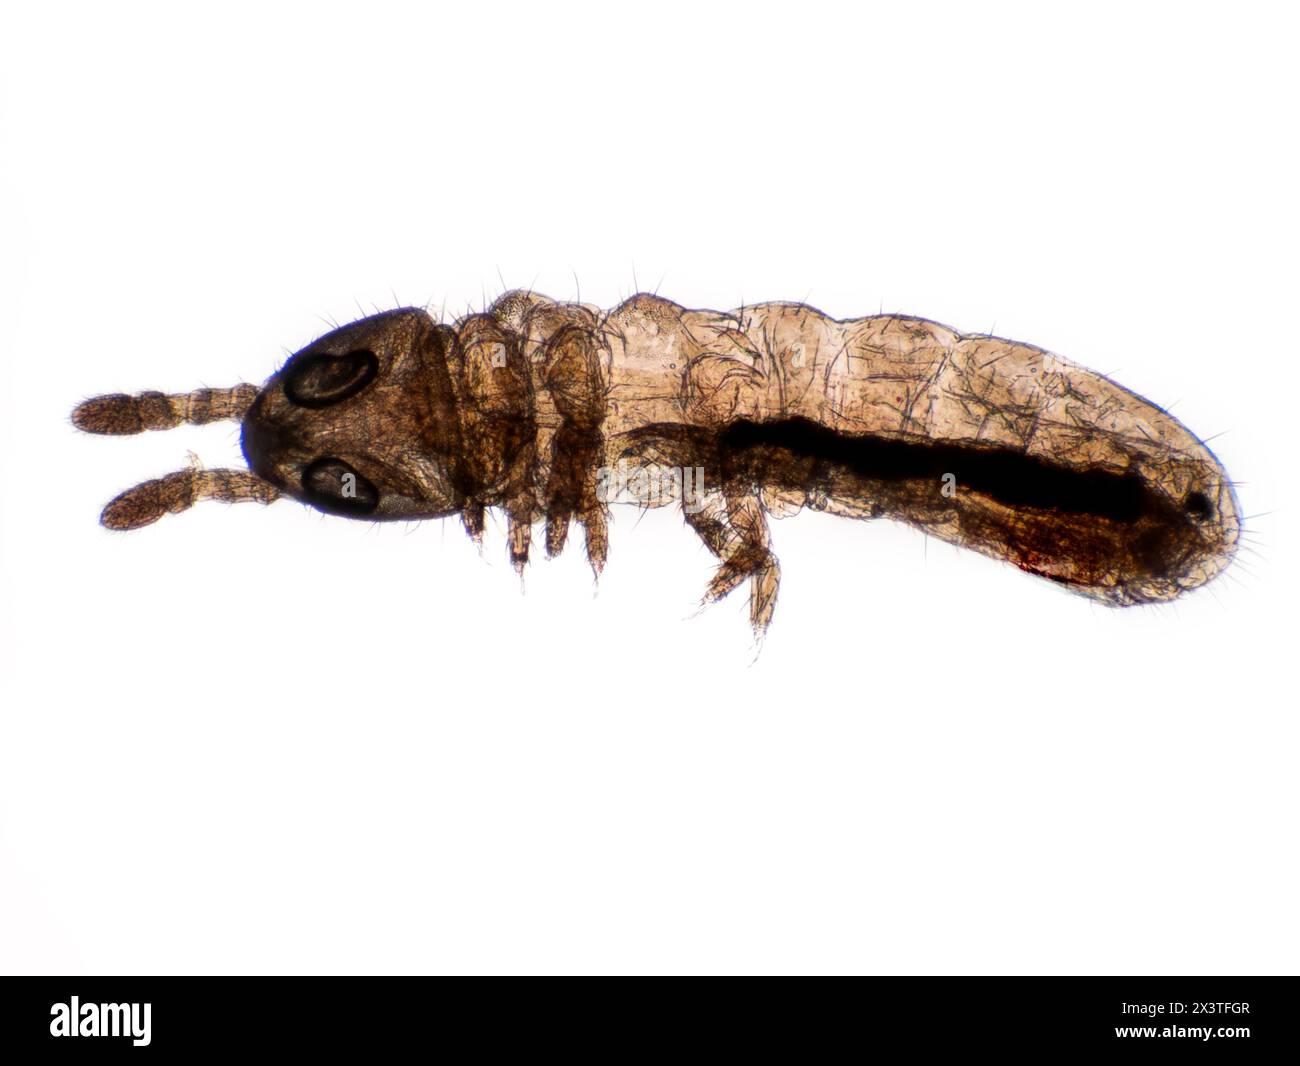 dorsal view photomicrograph a minute springtail (Collembola) showing the positioning of its antennae and eyes Stock Photo